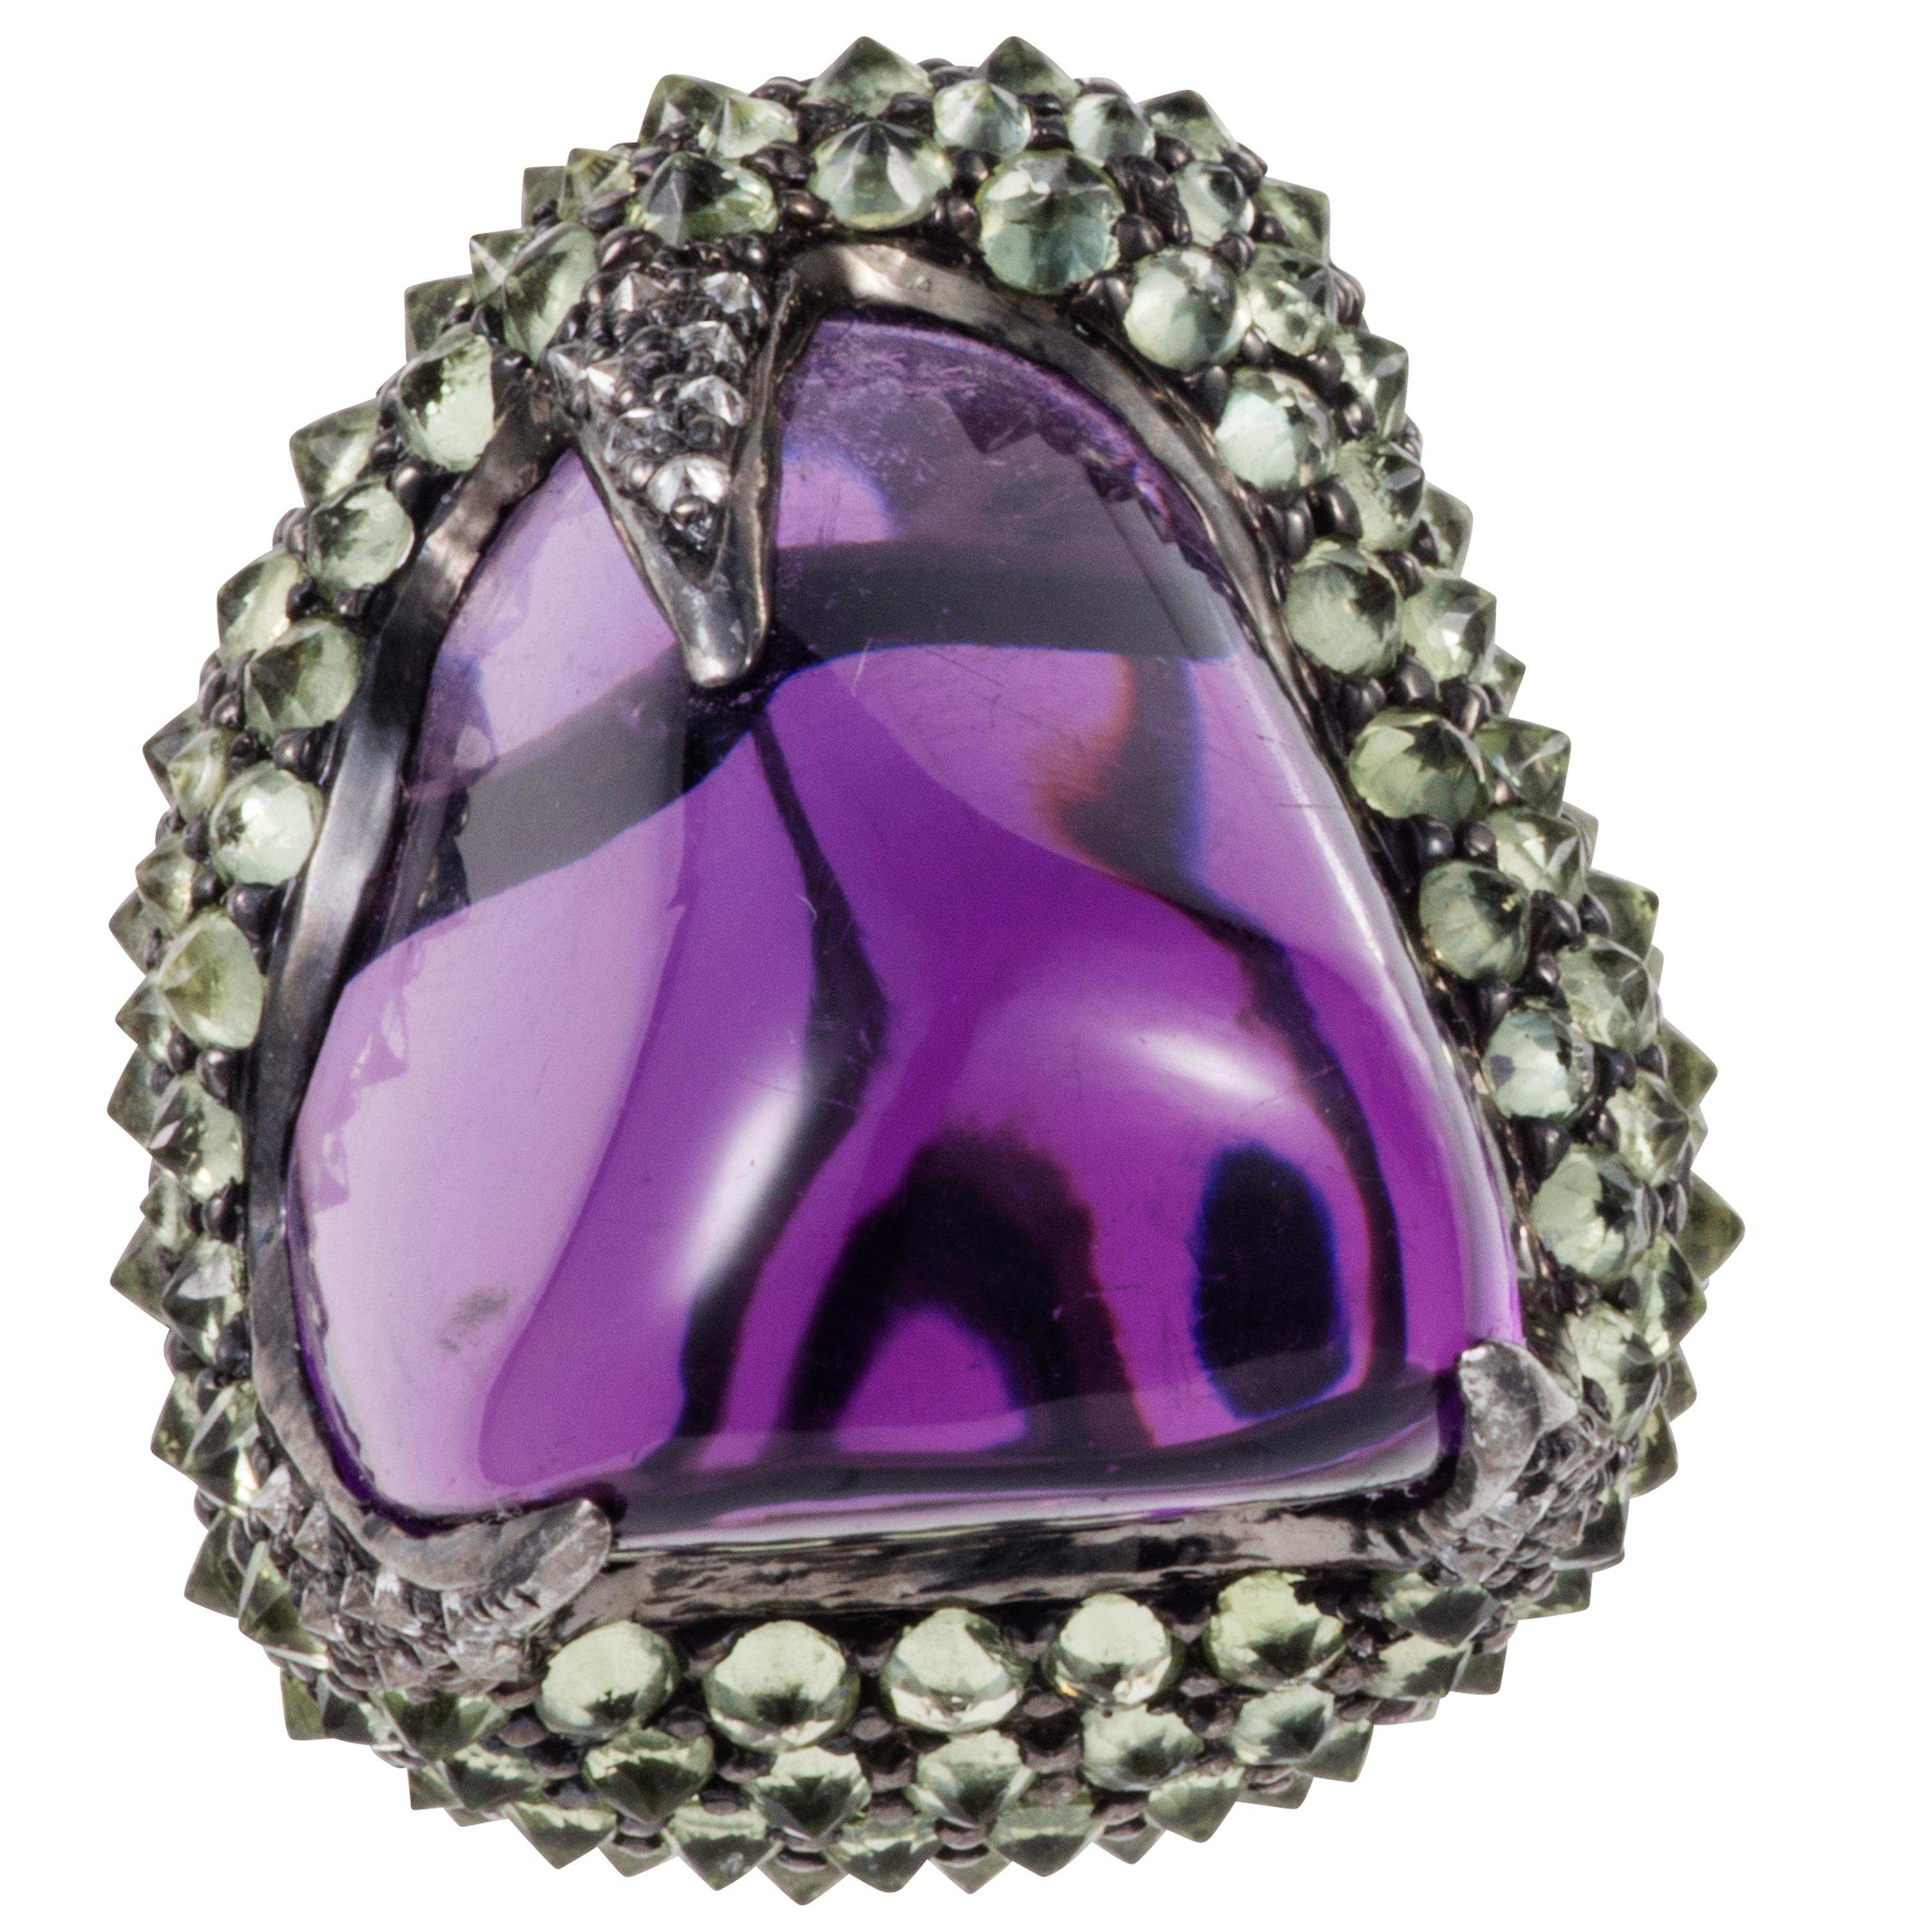 Gross weight: 31.120 grams 
Gold weight: 2.730 grams 
Amethyst: 74.140 carats
Peridots: 10.610 carats
Diamonds: 0.340 carats 
Silver: 11.400 grams 

Matching statement ring also available.  Glam rocks can be ordered in other precious stones.  All